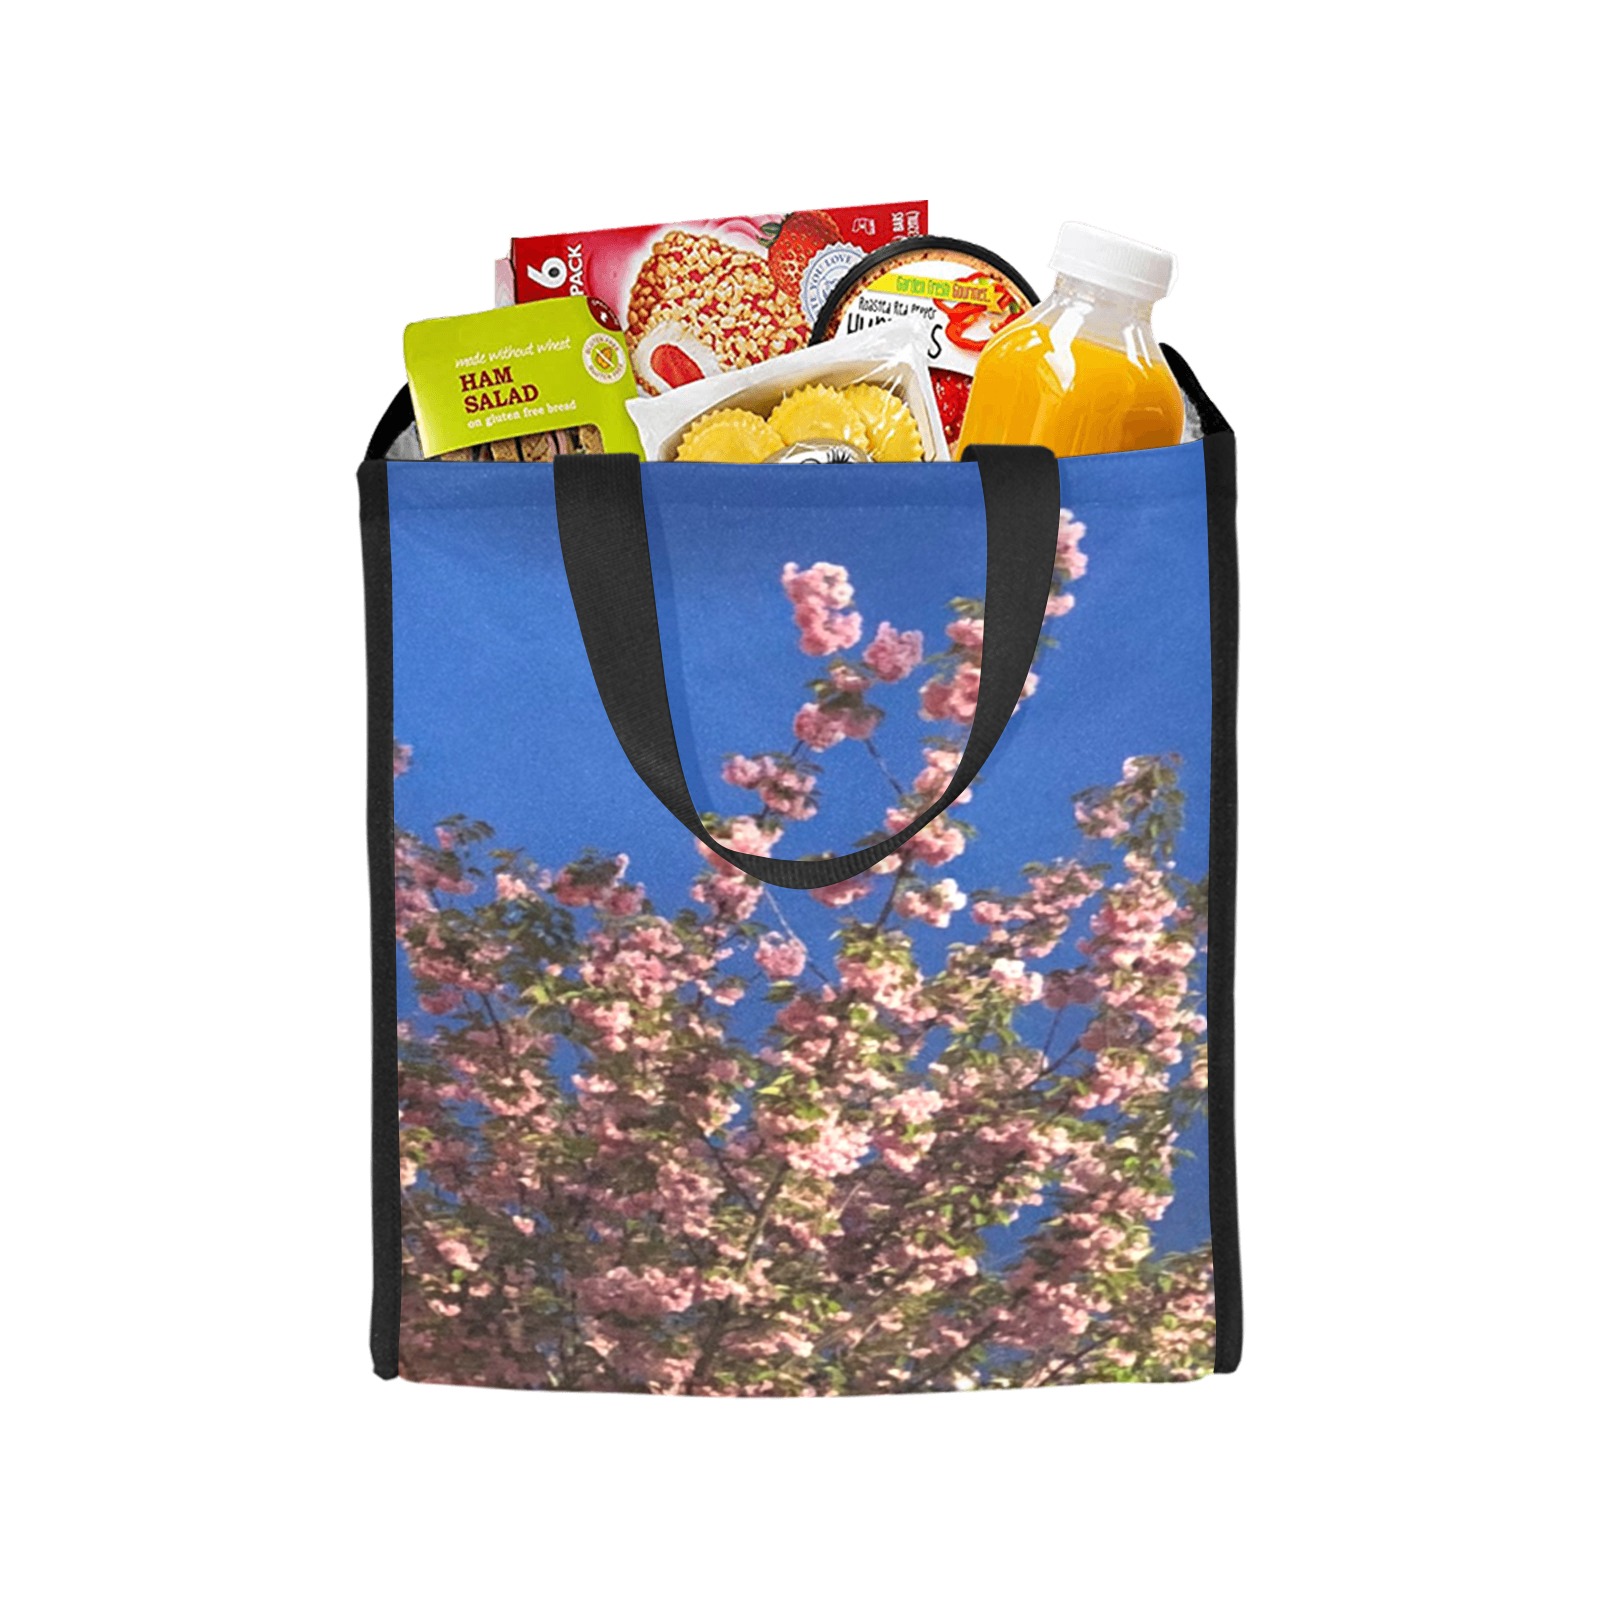 Cherry Tree Collection Picnic Tote Bag (Model 1717)